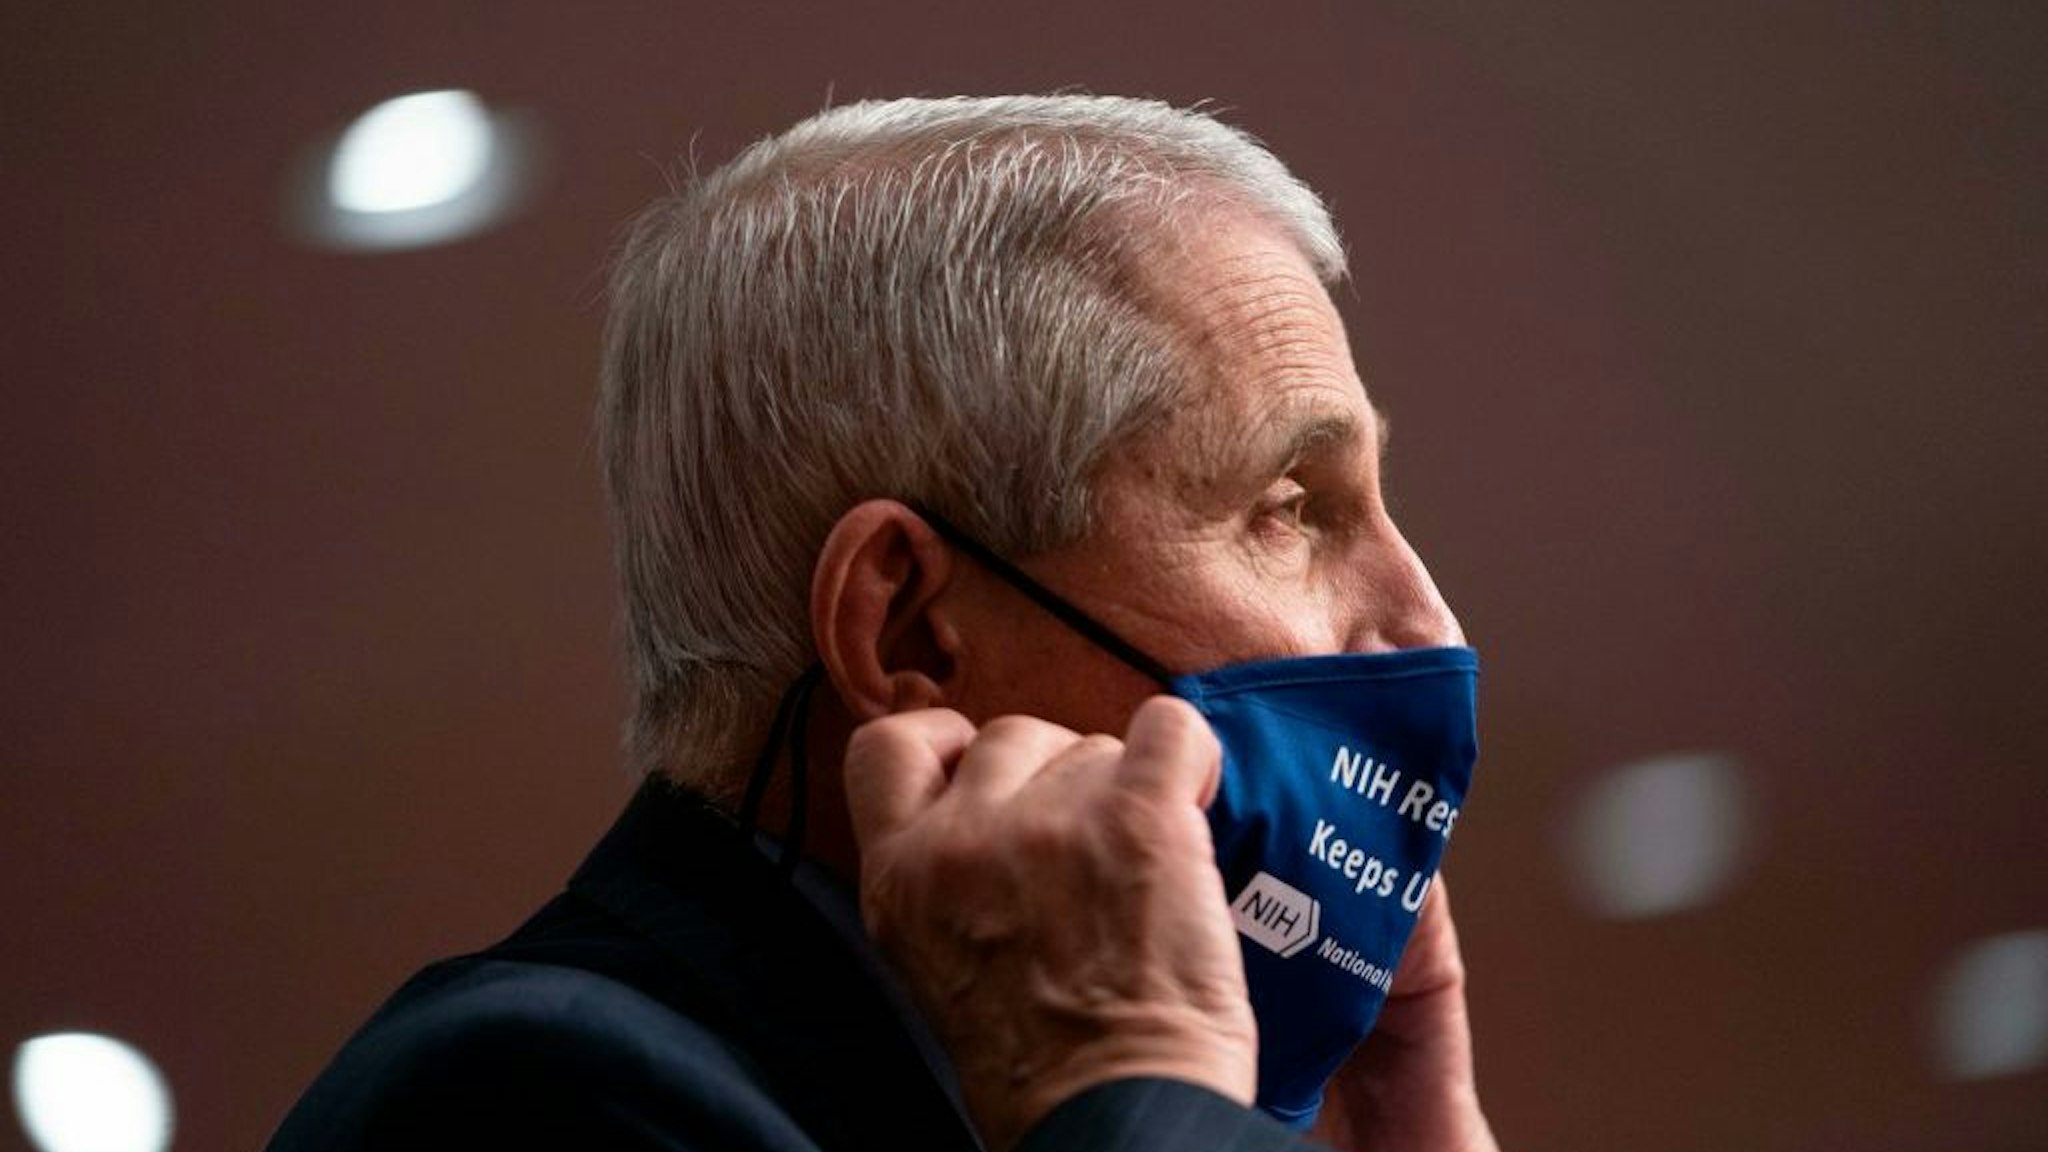 Dr. Anthony Fauci,Director, National Institute of Allergy and Infectious Diseases, National Institutes of Health, removes his mask as he testifies during a US Senate Senate Health, Education, Labor, and Pensions Committee hearing to examine covid-19, focusing on an update on the federal response in Washington, DC, on September 23, 2020. (Photo by Alex Edelman / POOL / AFP) (Photo by ALEX EDELMAN/POOL/AFP via Getty Images)